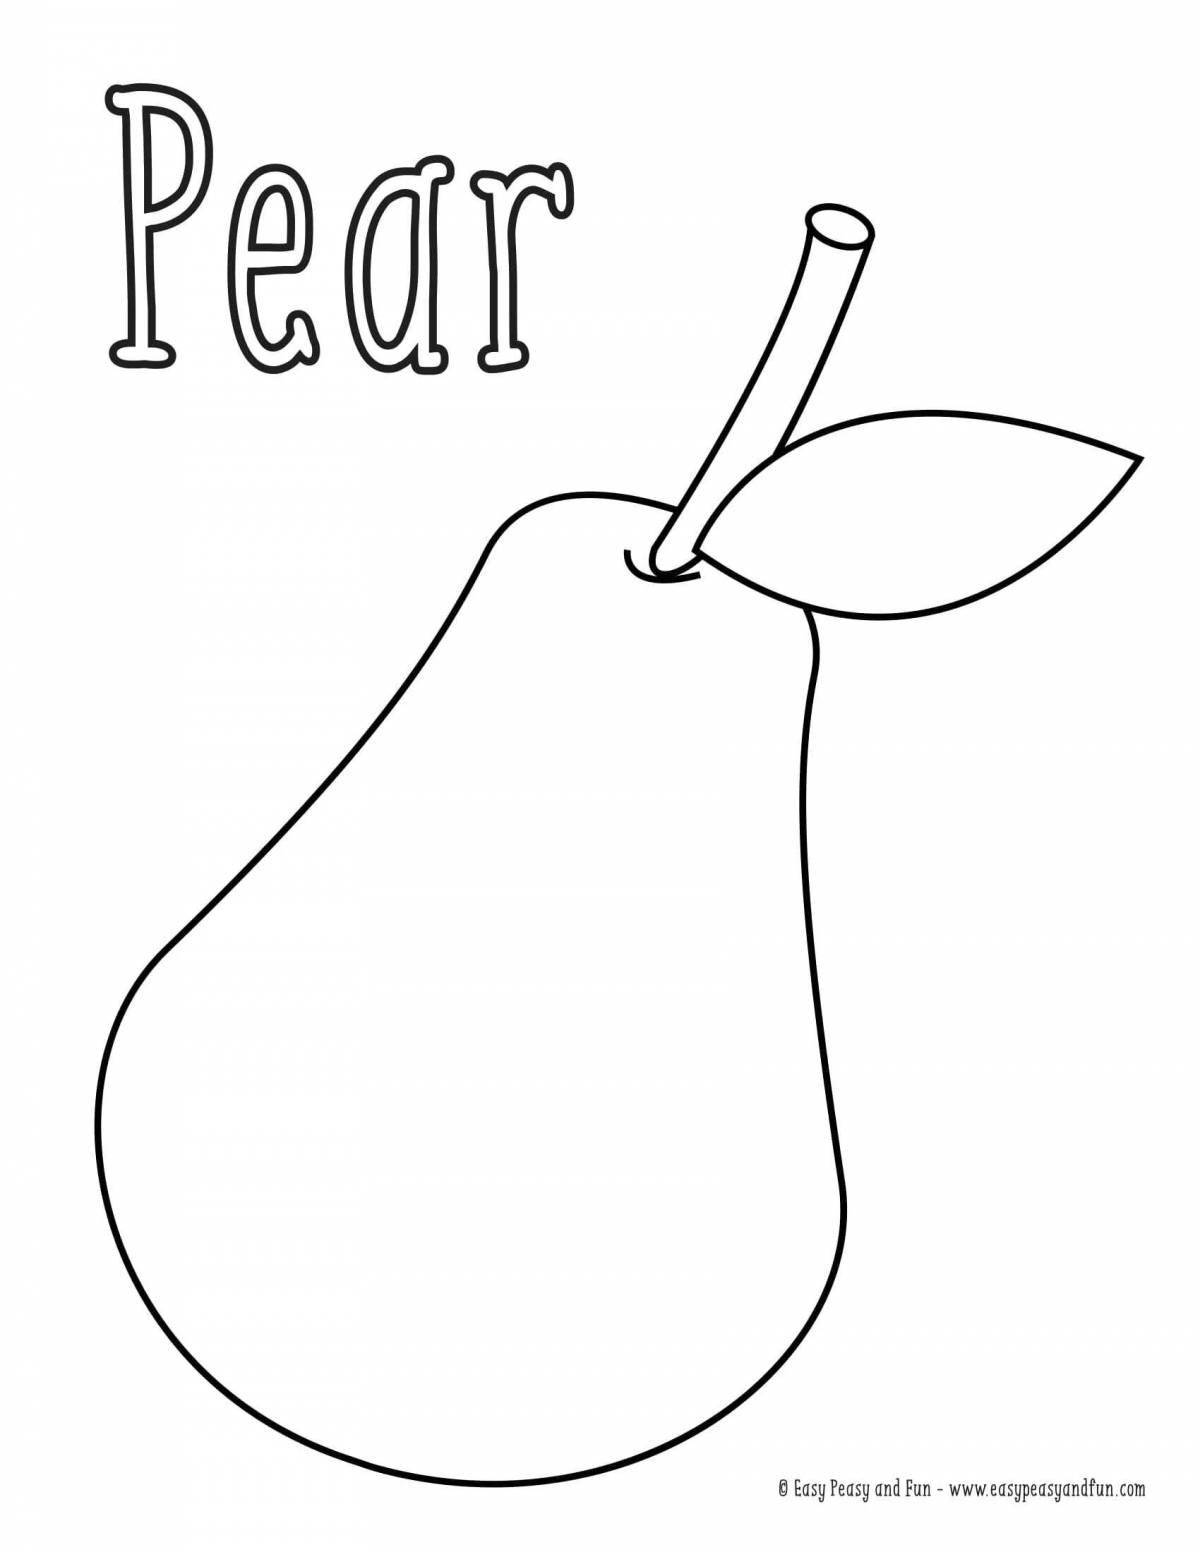 Funny pear coloring for children 2-3 years old